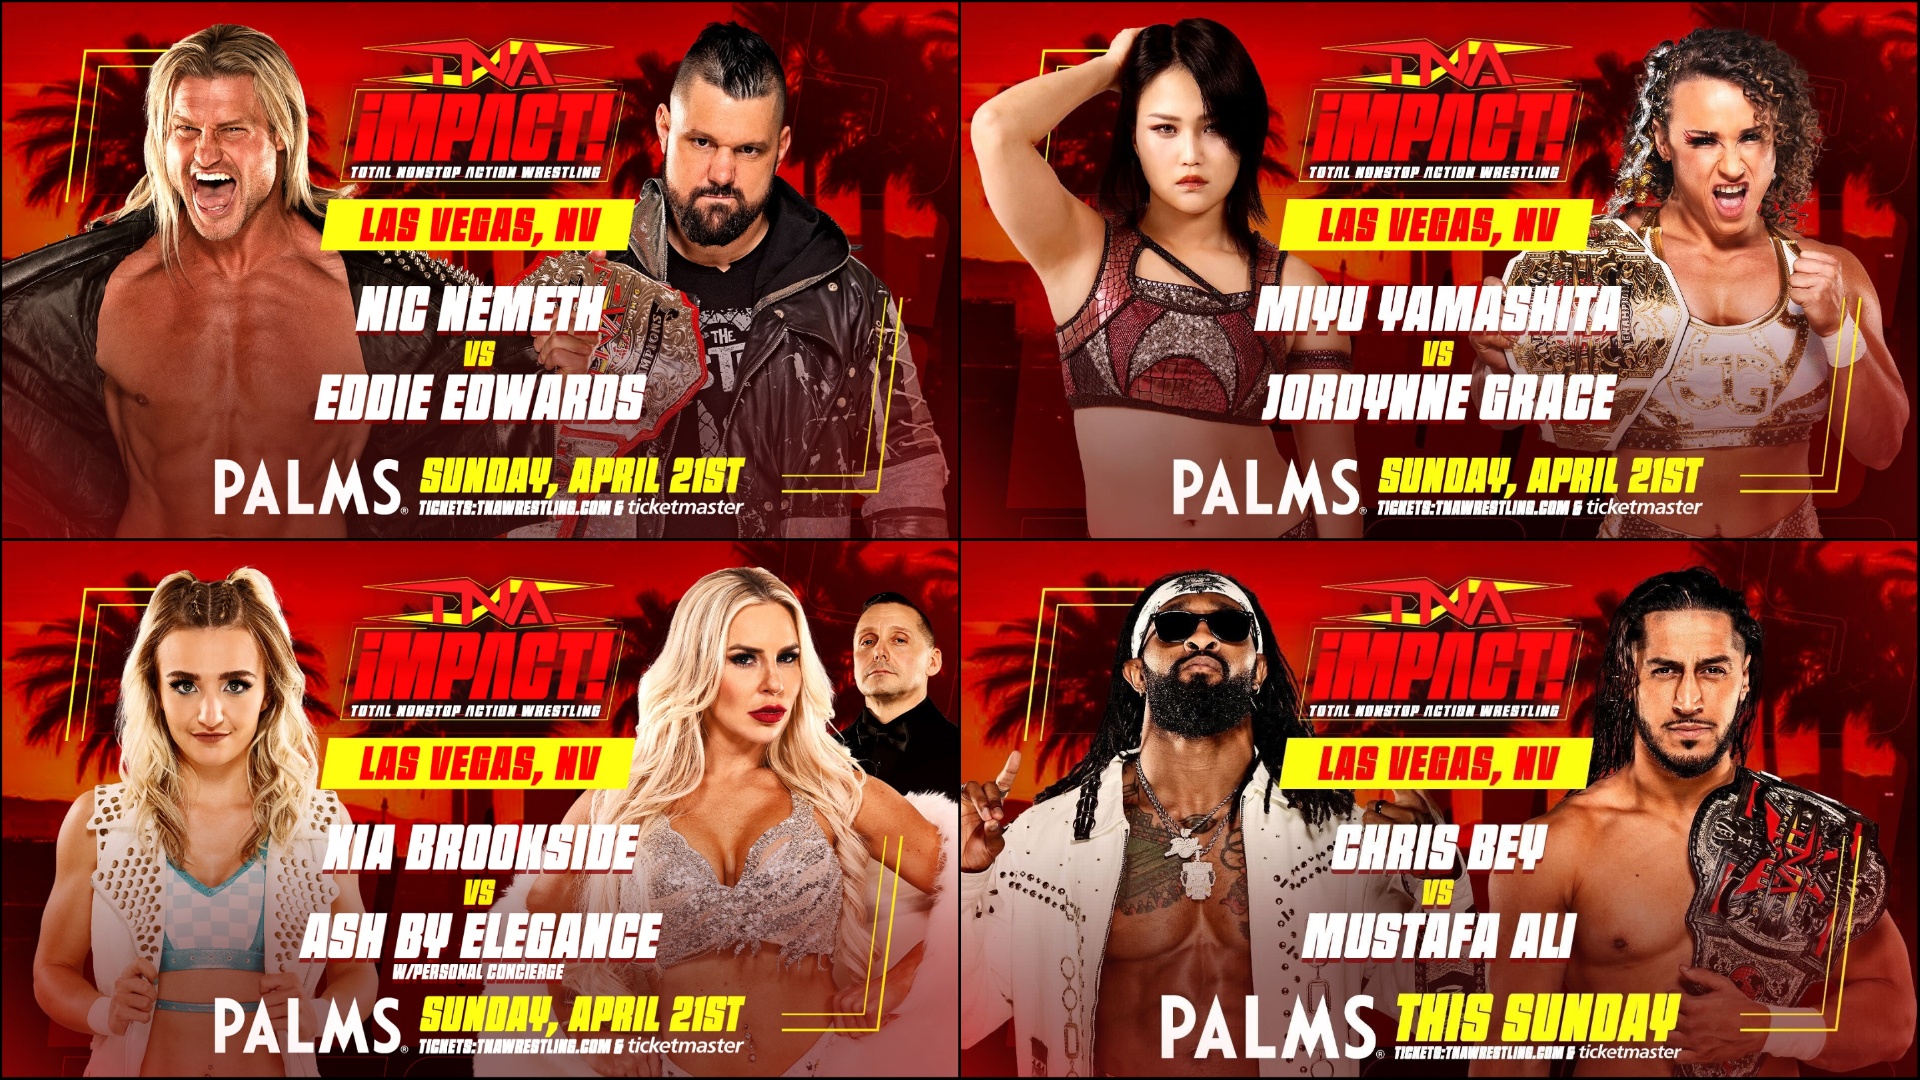 Las Vegas! See More Action This Sunday as TNA Wrestling Presents iMPACT! – TNA Wrestling